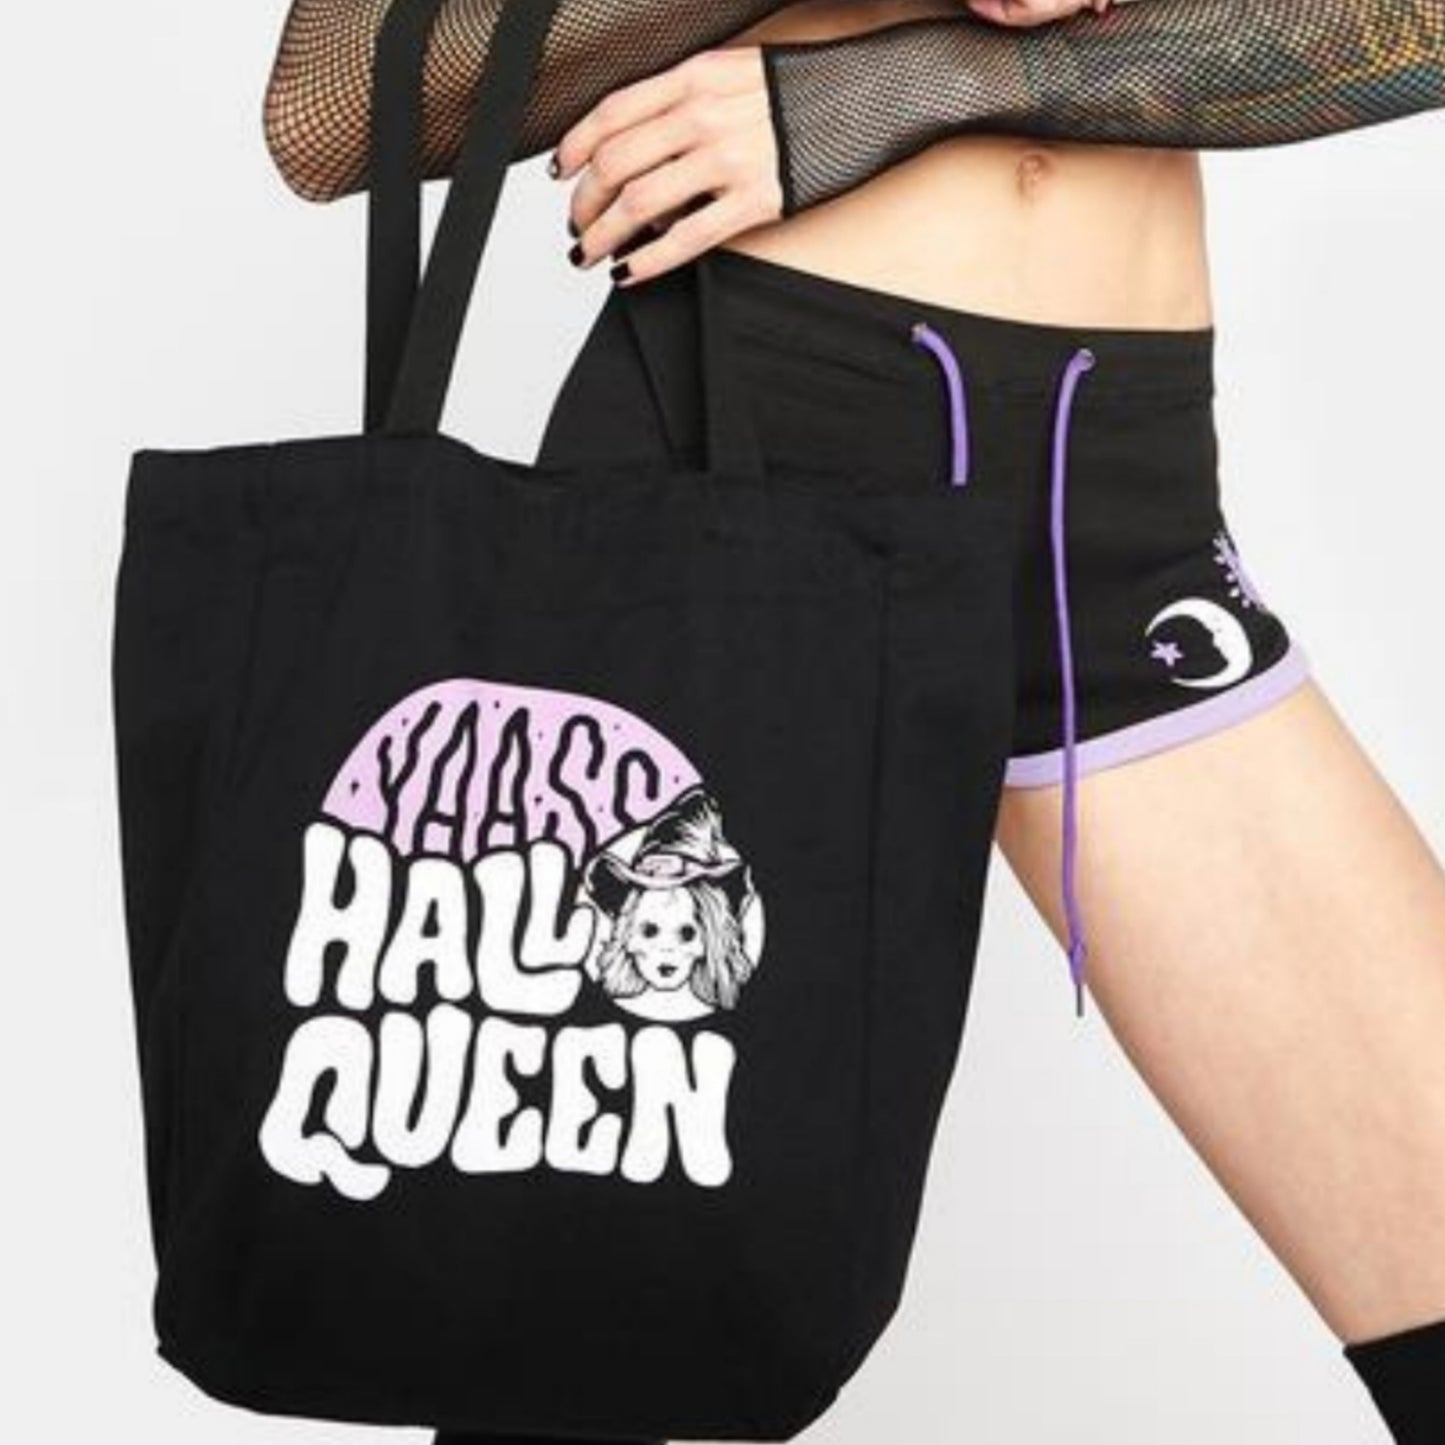 Queen Witch Tote Bag | Black Purple Witchy Graphic Cotton - Too Fast - Tote Bags